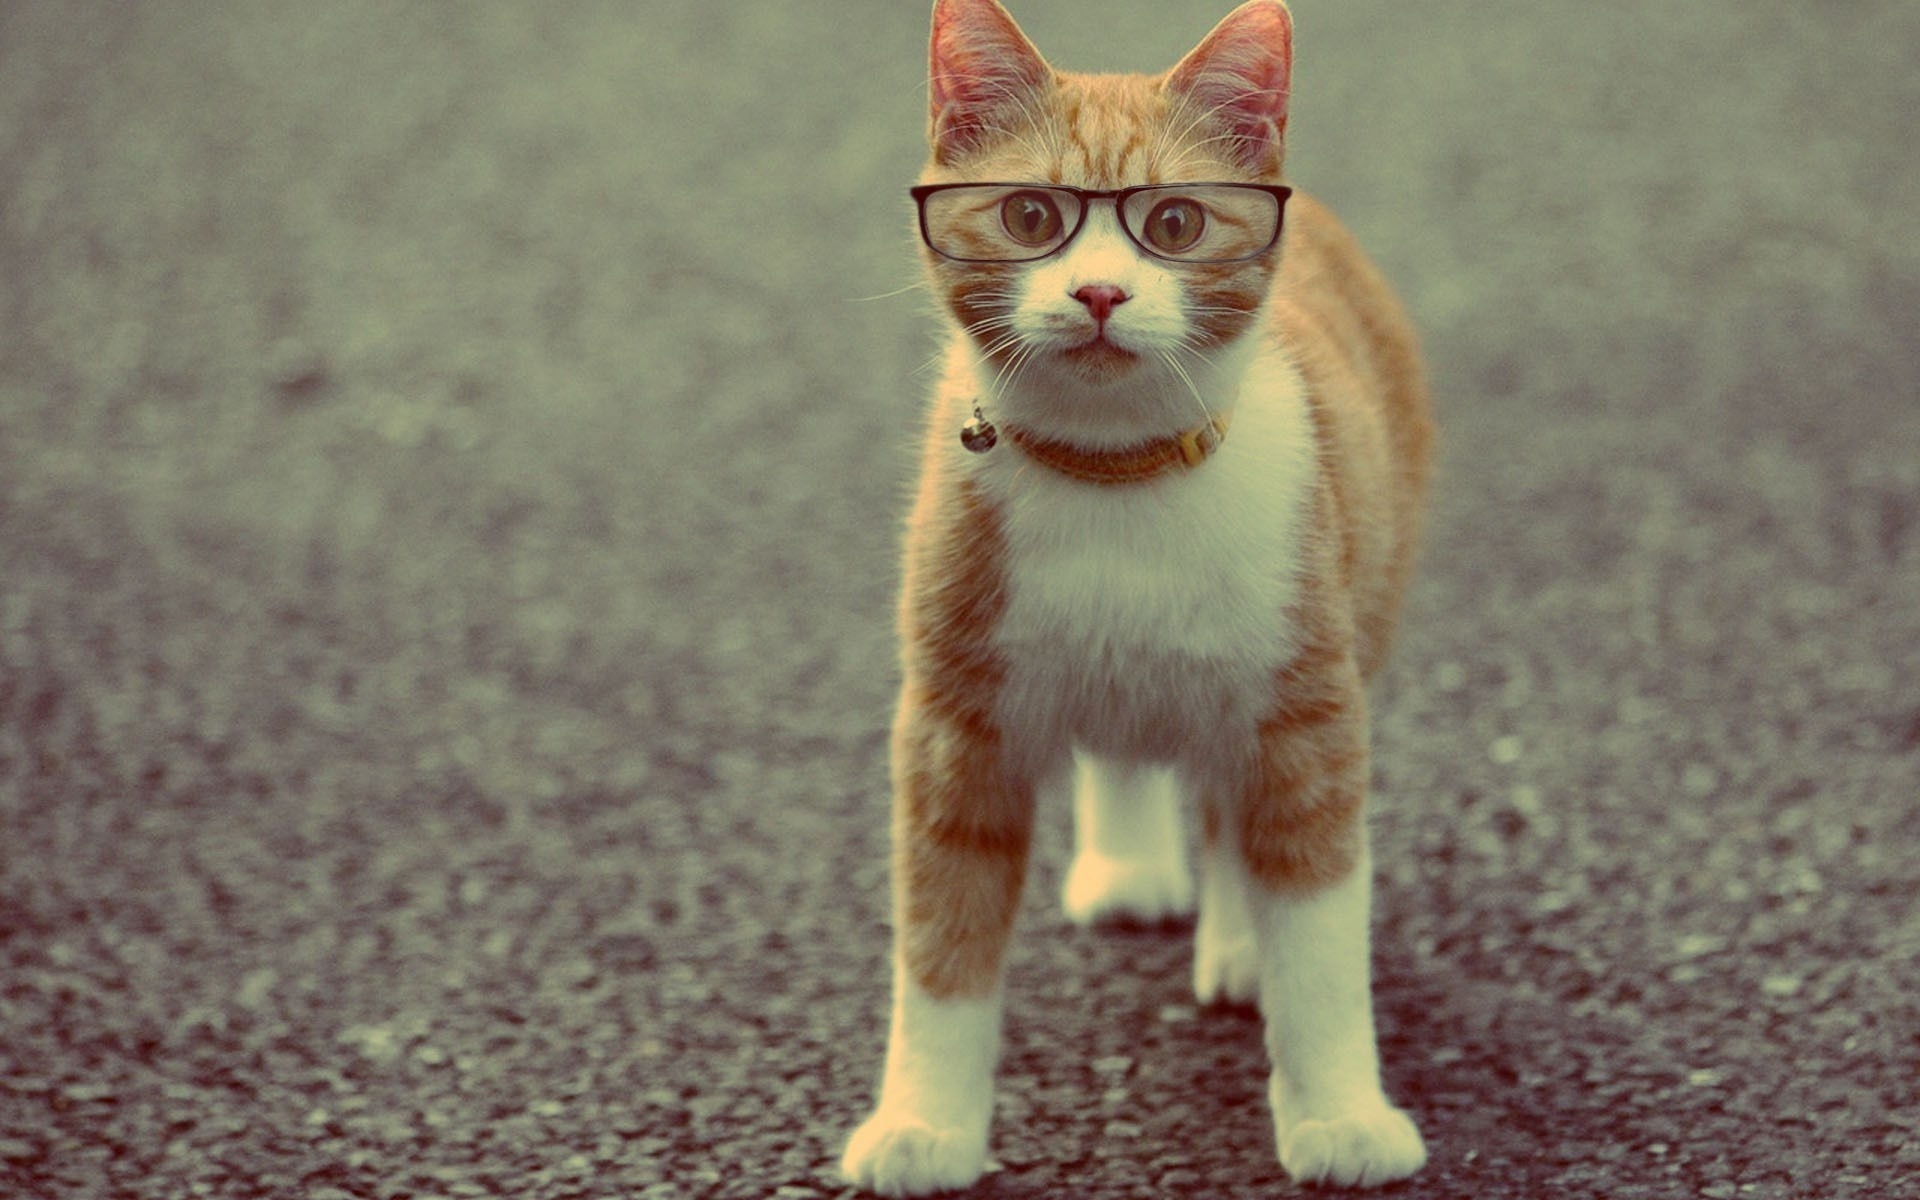 animals, Cats, Felines, Glasses, Humor, Funny, Cute, Eyes, Face, Whiskers Wallpaper